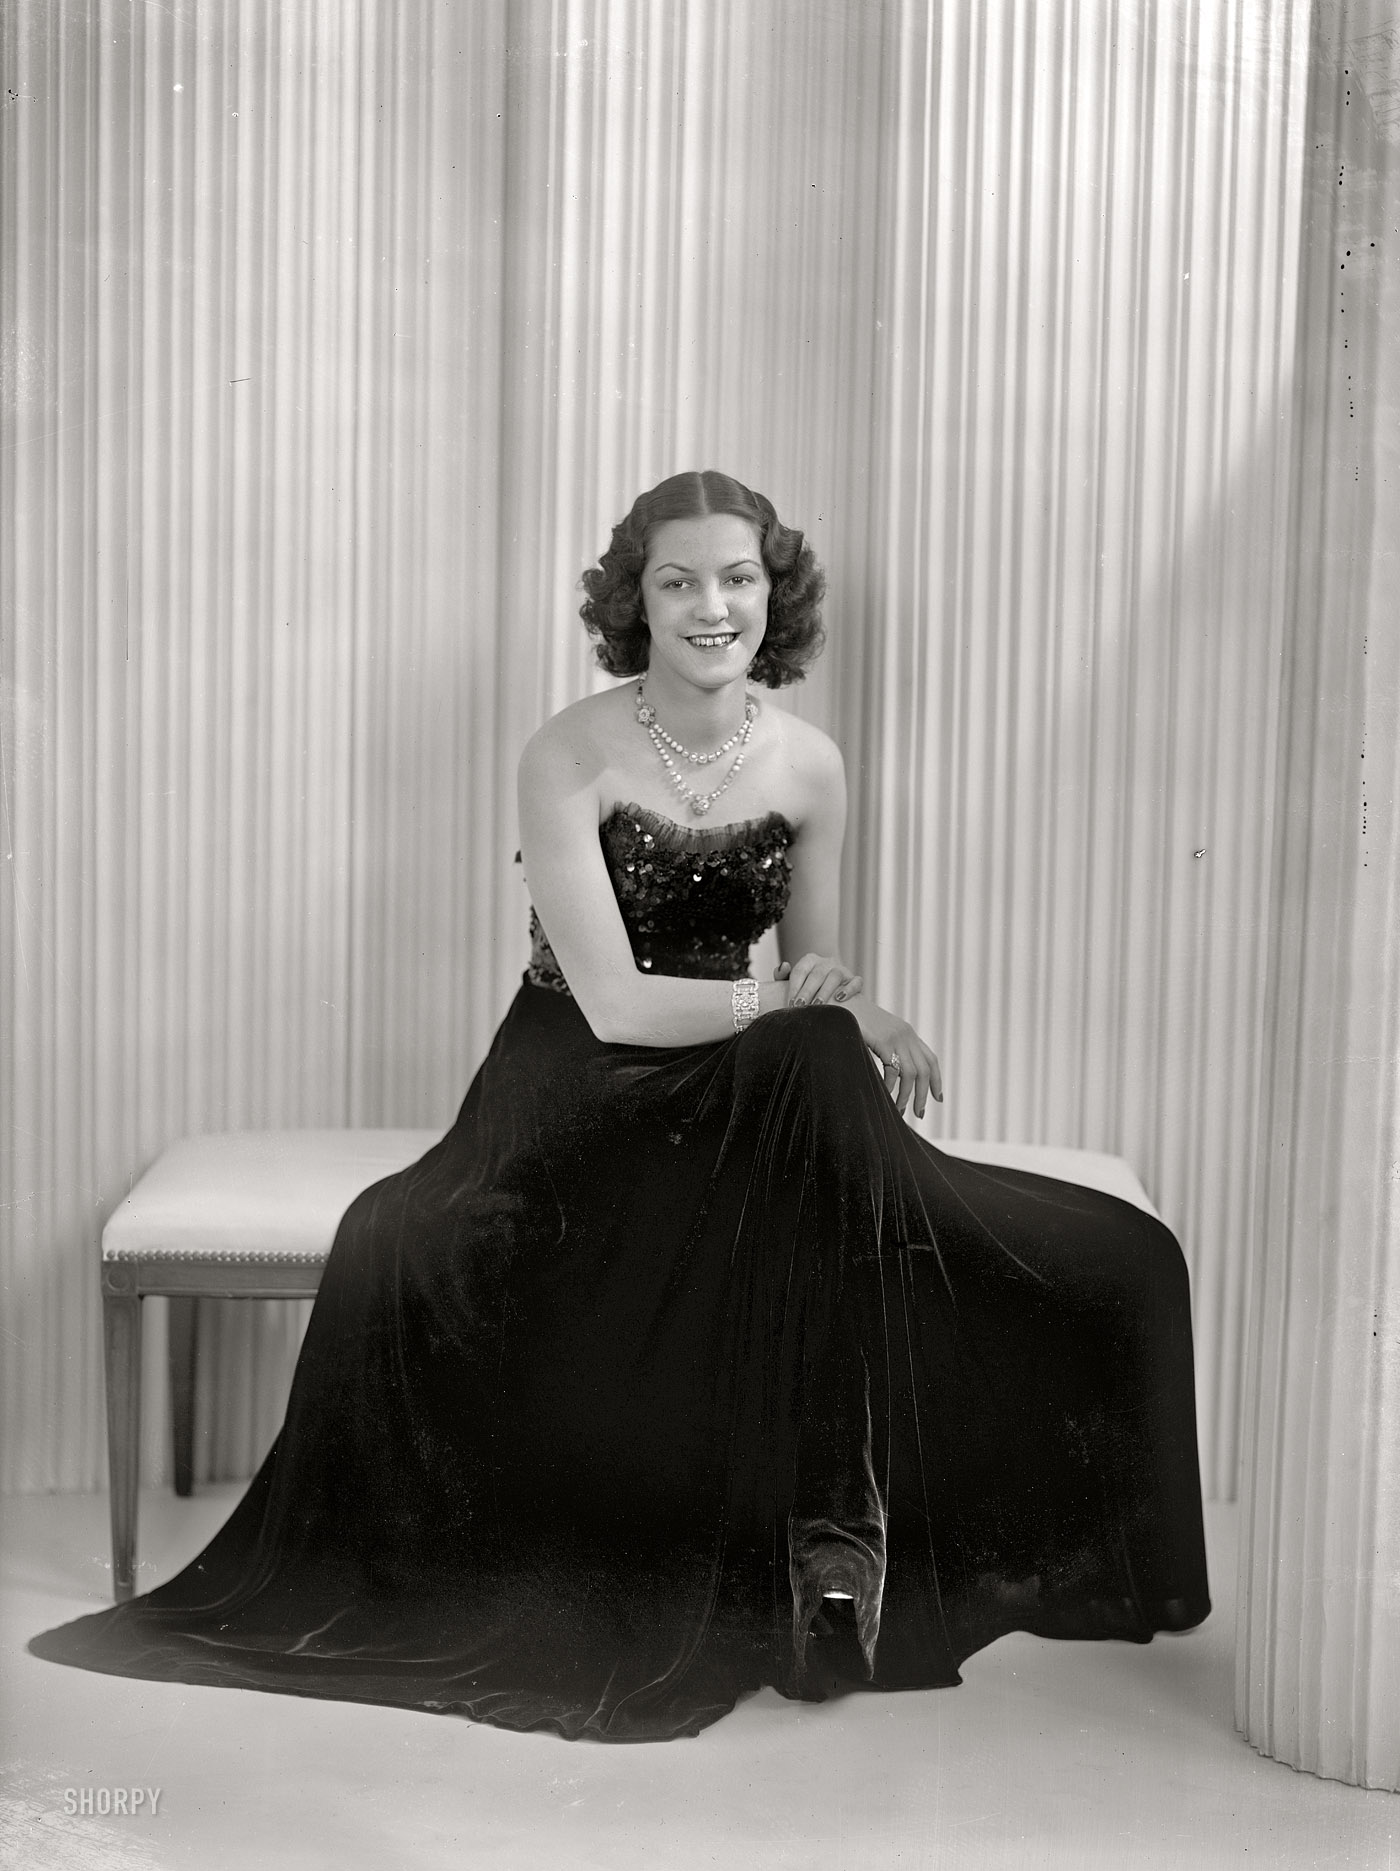 Washington, D.C., 1939. "Henderson, Adrienne, Miss, portrait." The town, a night on, ready for. Harris & Ewing Collection glass negative. View full size.